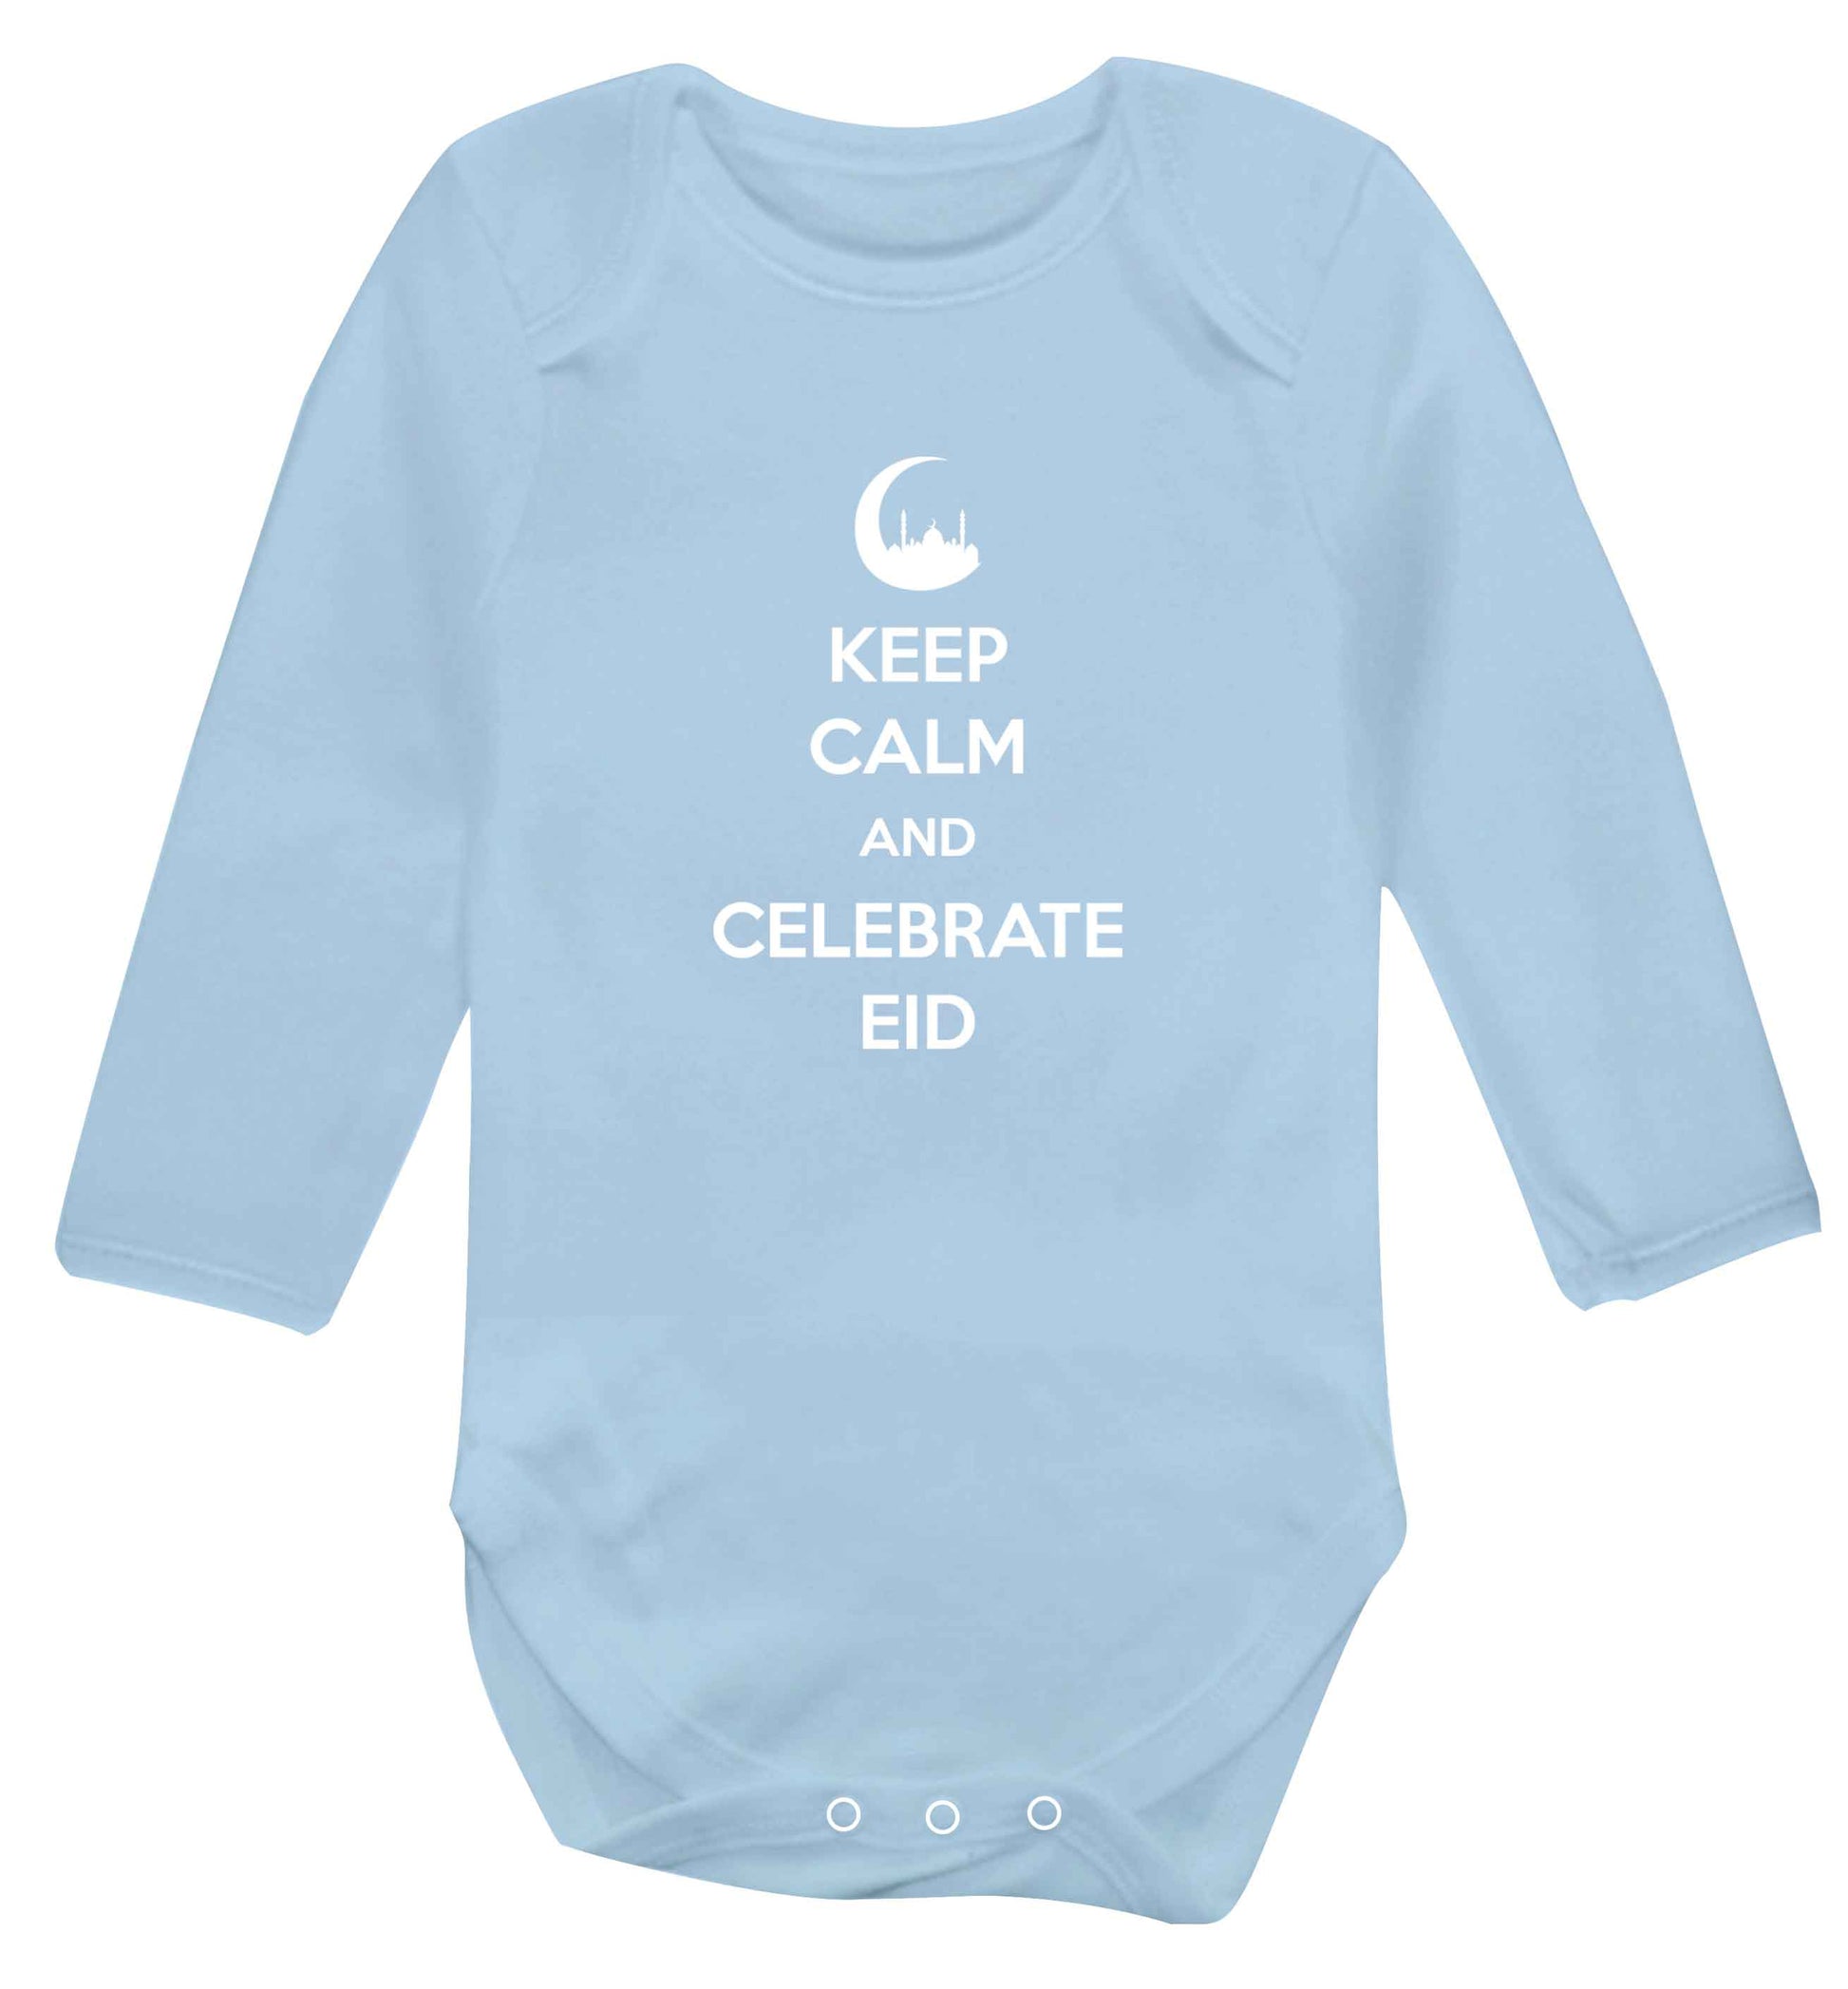 Keep calm and celebrate Eid baby vest long sleeved pale blue 6-12 months